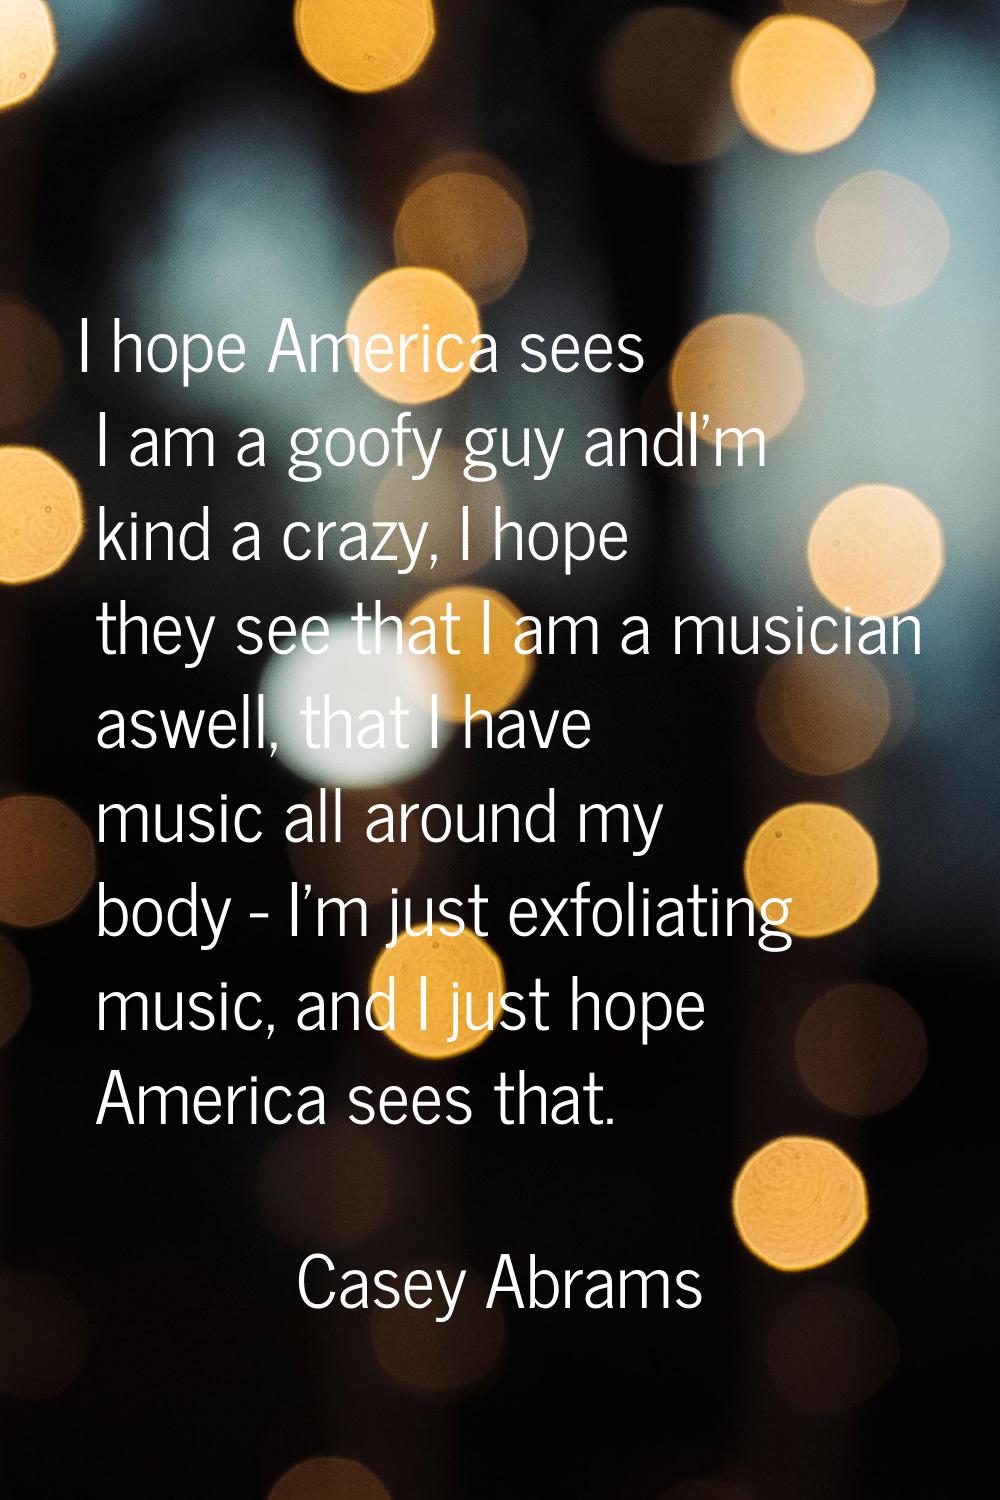 I hope America sees I am a goofy guy andI'm kind a crazy, I hope they see that I am a musician aswe